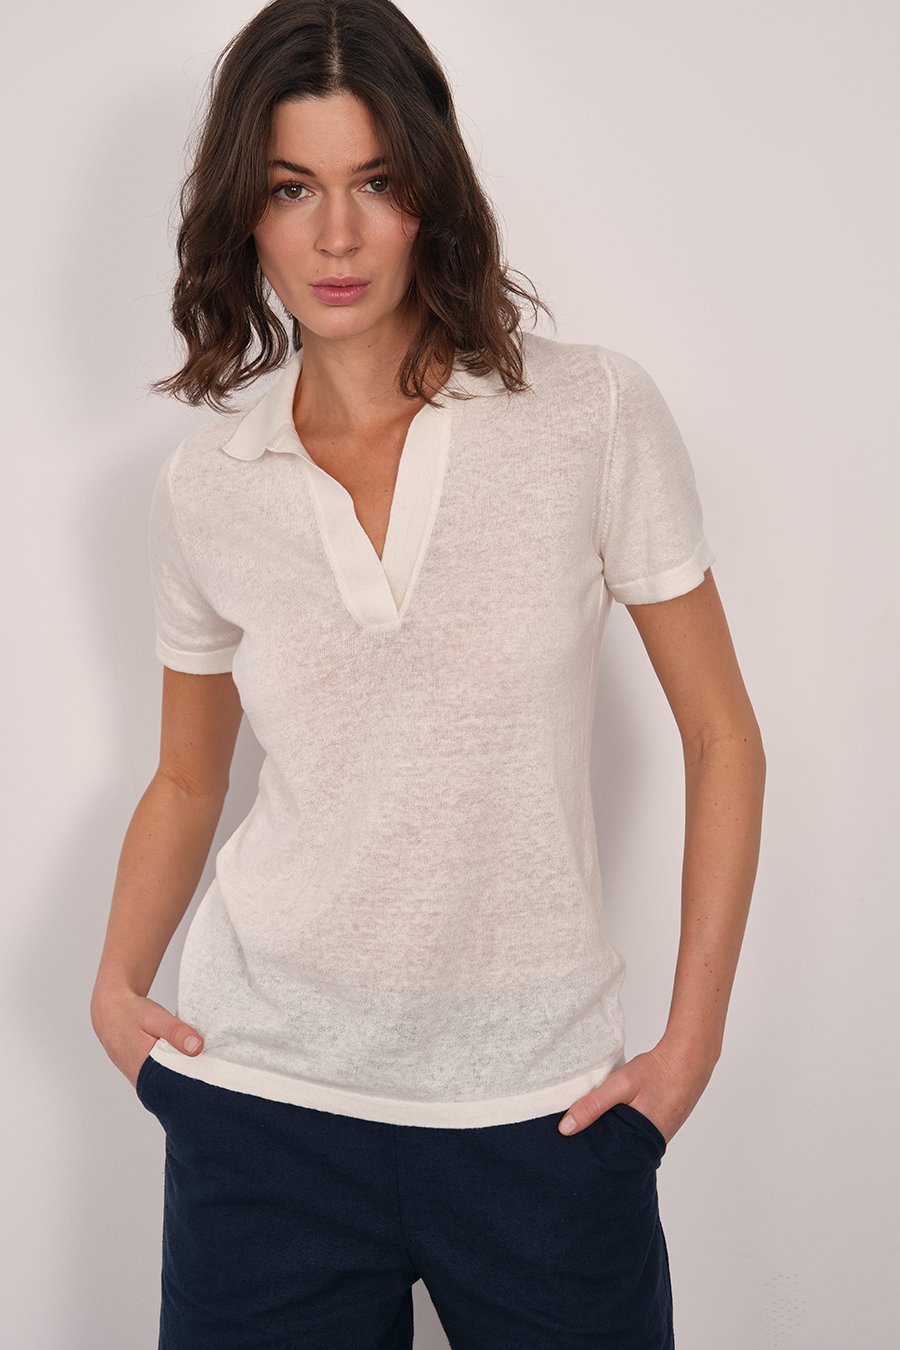 Polo Neck Knit Tee in Cotton/Linen Blend